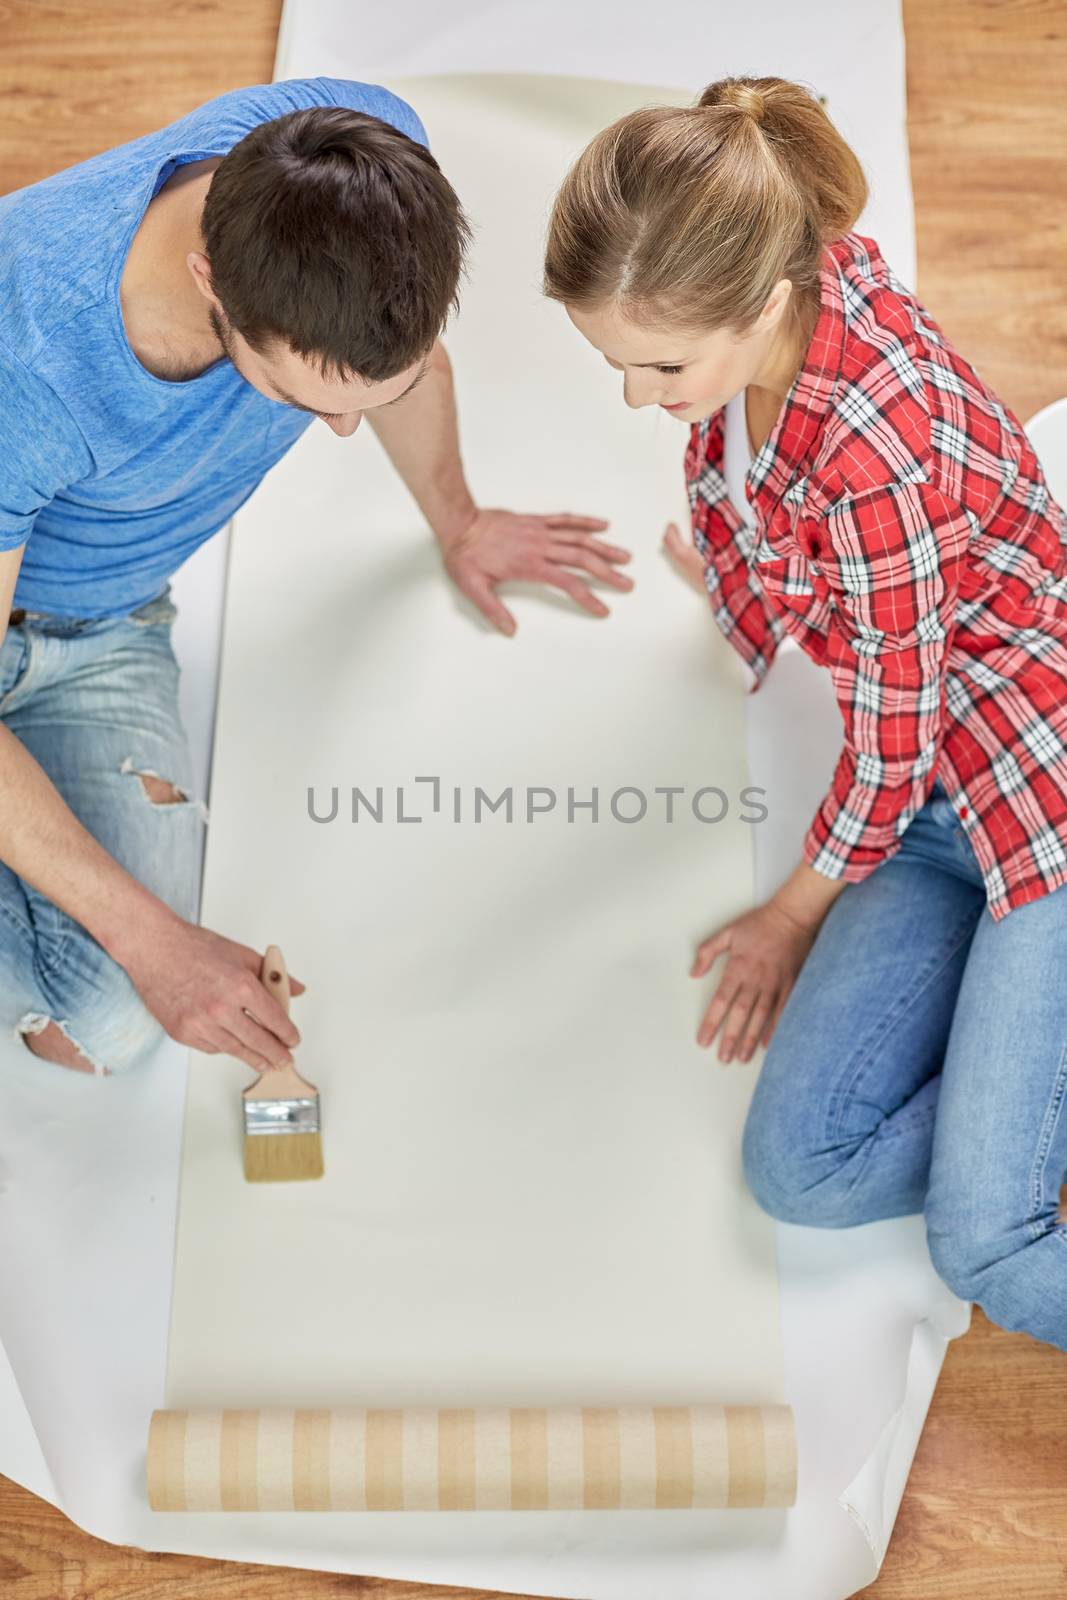 repair, renovation, building and people concept - close up of couple smearing wallpaper with glue on floor at home